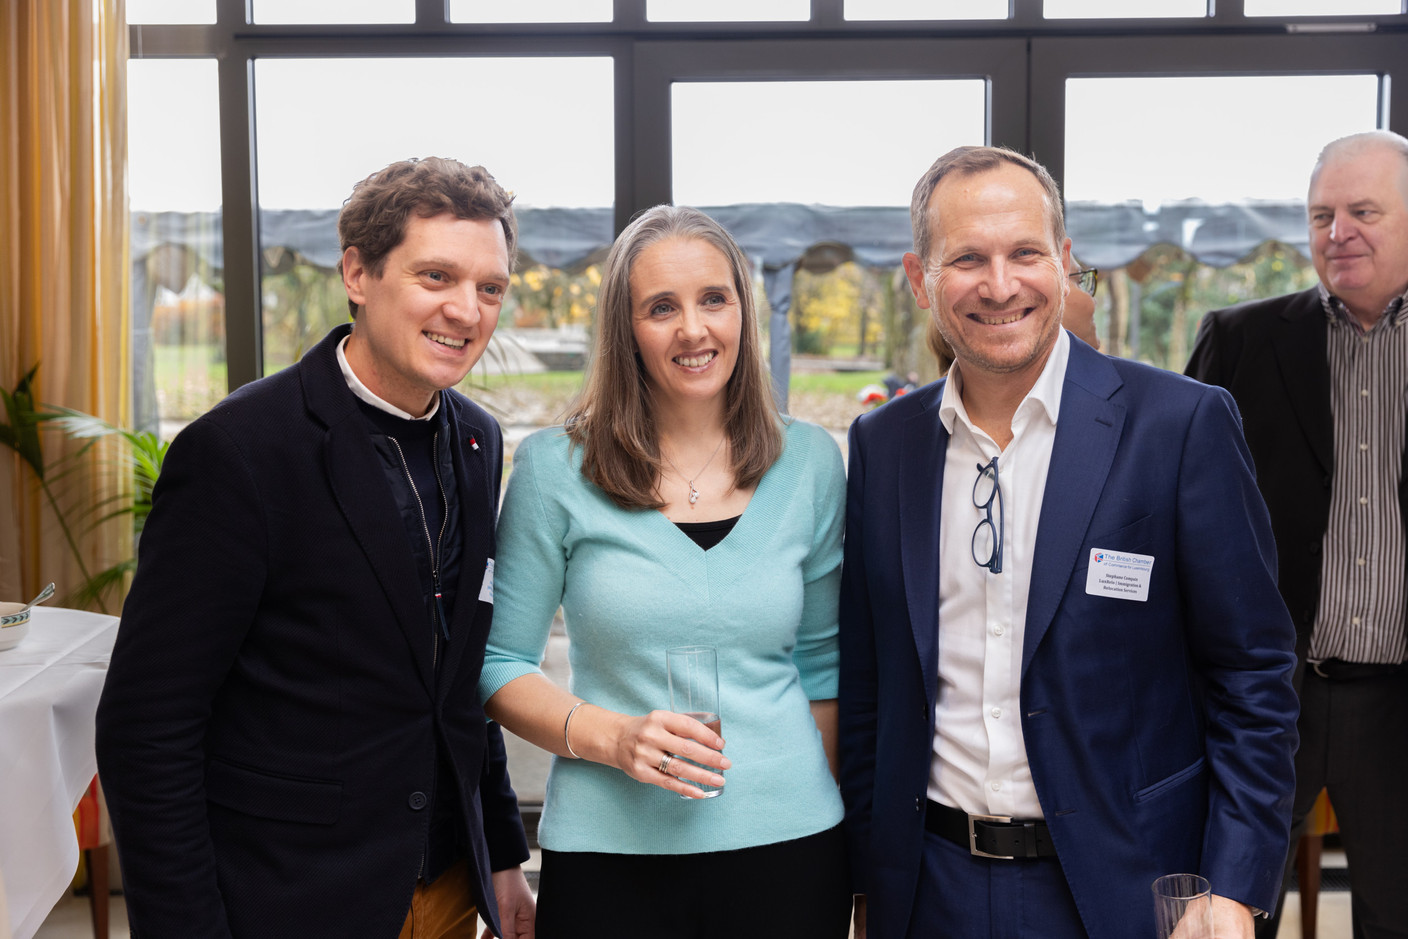 (l-r) Jonathan Norman, tax counsel at JAB Holding and British Chamber of Commerce council member, Laura Foulds, managing director at Analie Tax & Consulting, and Stephane Compain, CEO of Luxrelo, at the BCC & Amcham Personal Tax Lunch on 21 November 2023. Photo: Romain Gamba / Maison Moderne